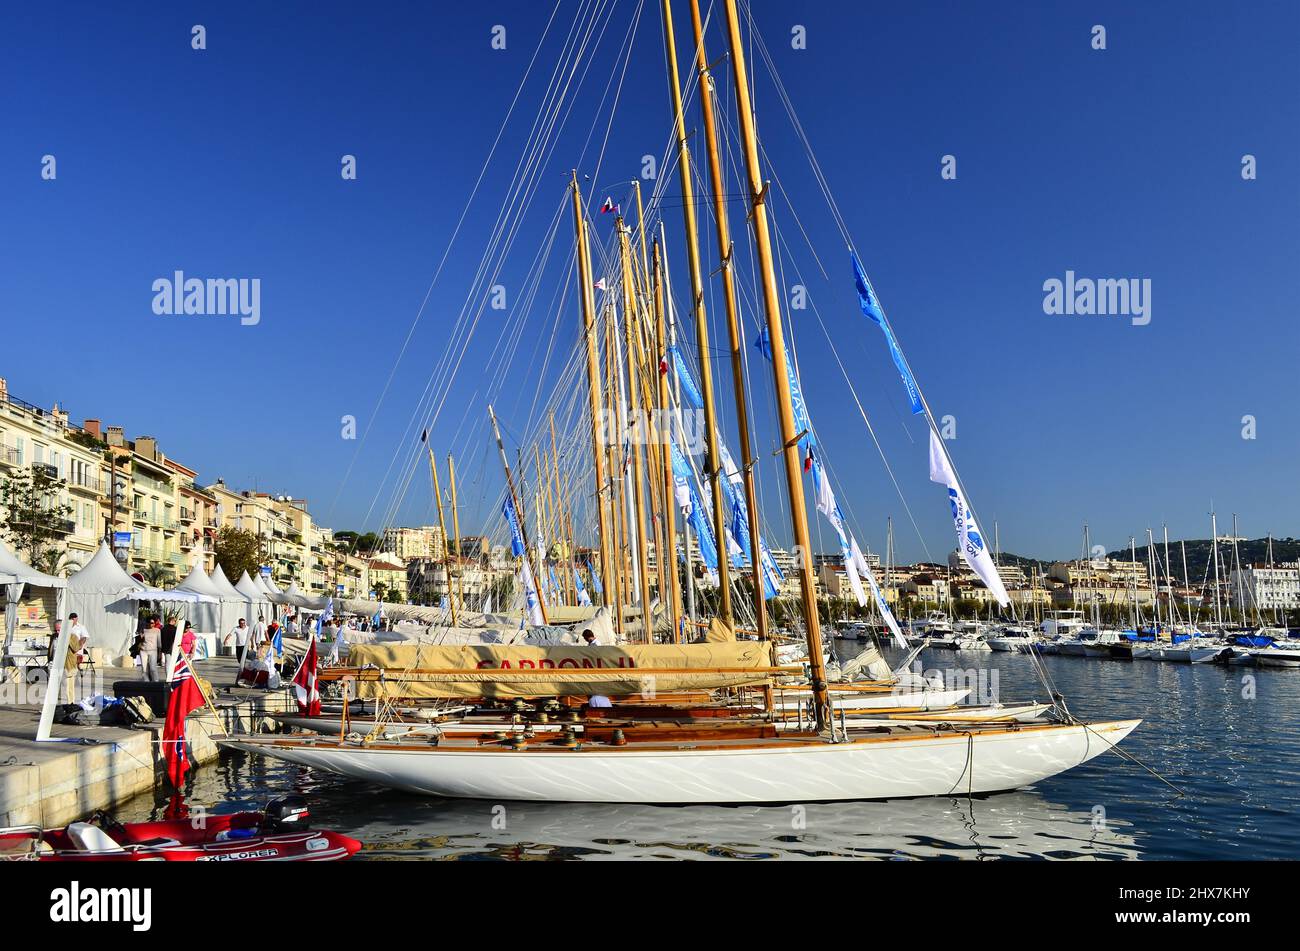 Sailboats in marina, sunny French Riviera, city of Cannes in the province of Alpes-Maritimes southern France. Stock Photo